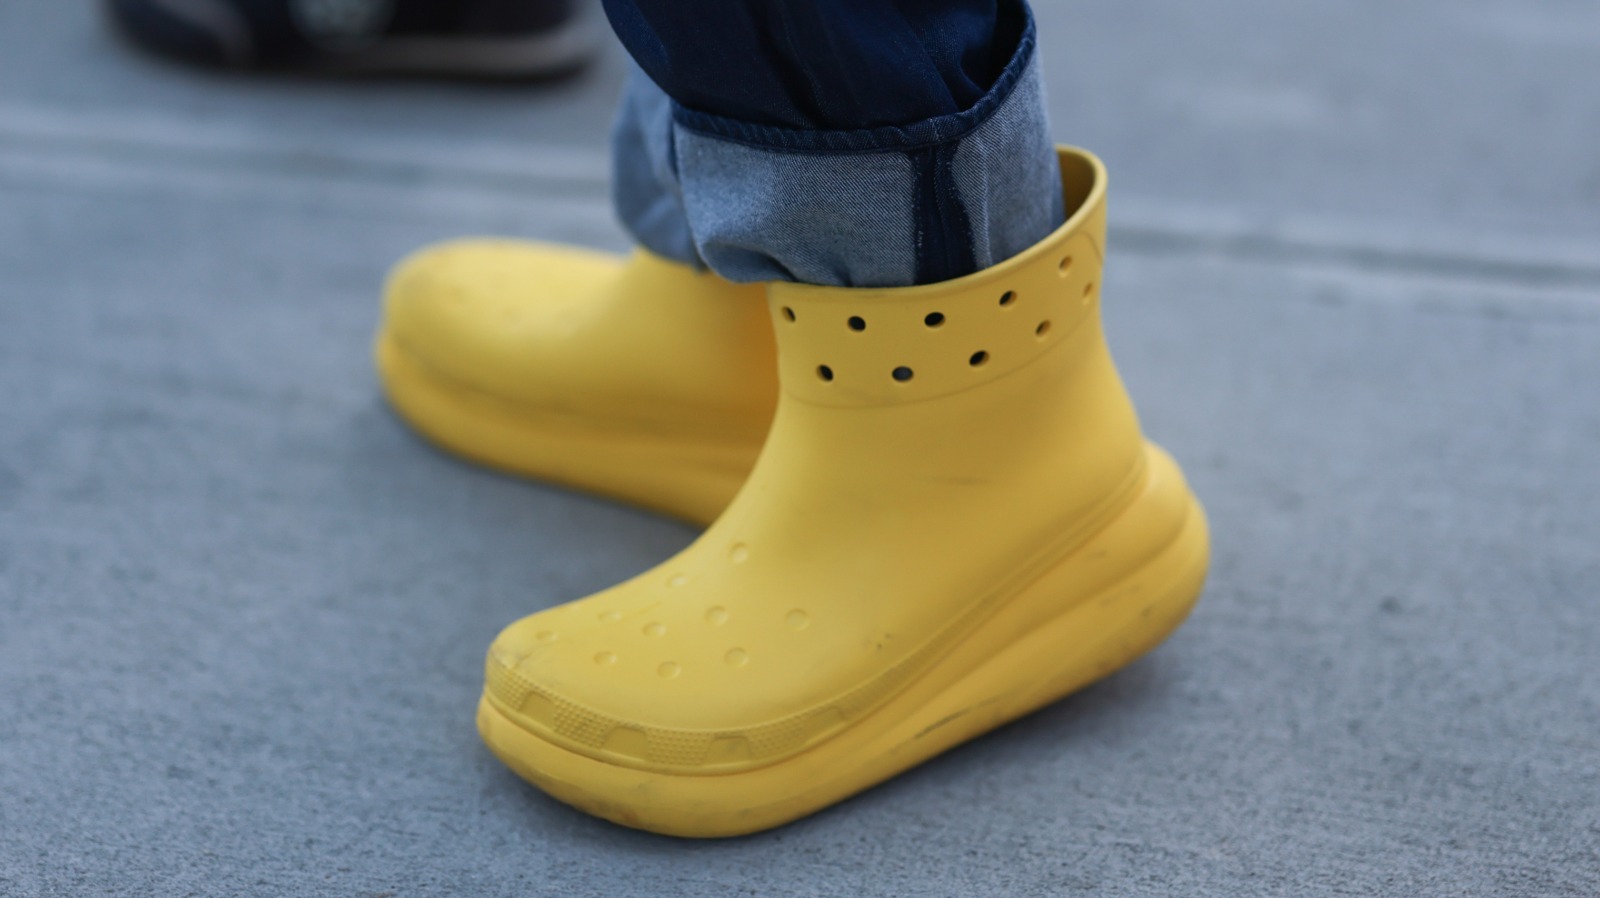 Clogs are shoes for uncertain times: the rise of footwear's 'ugly